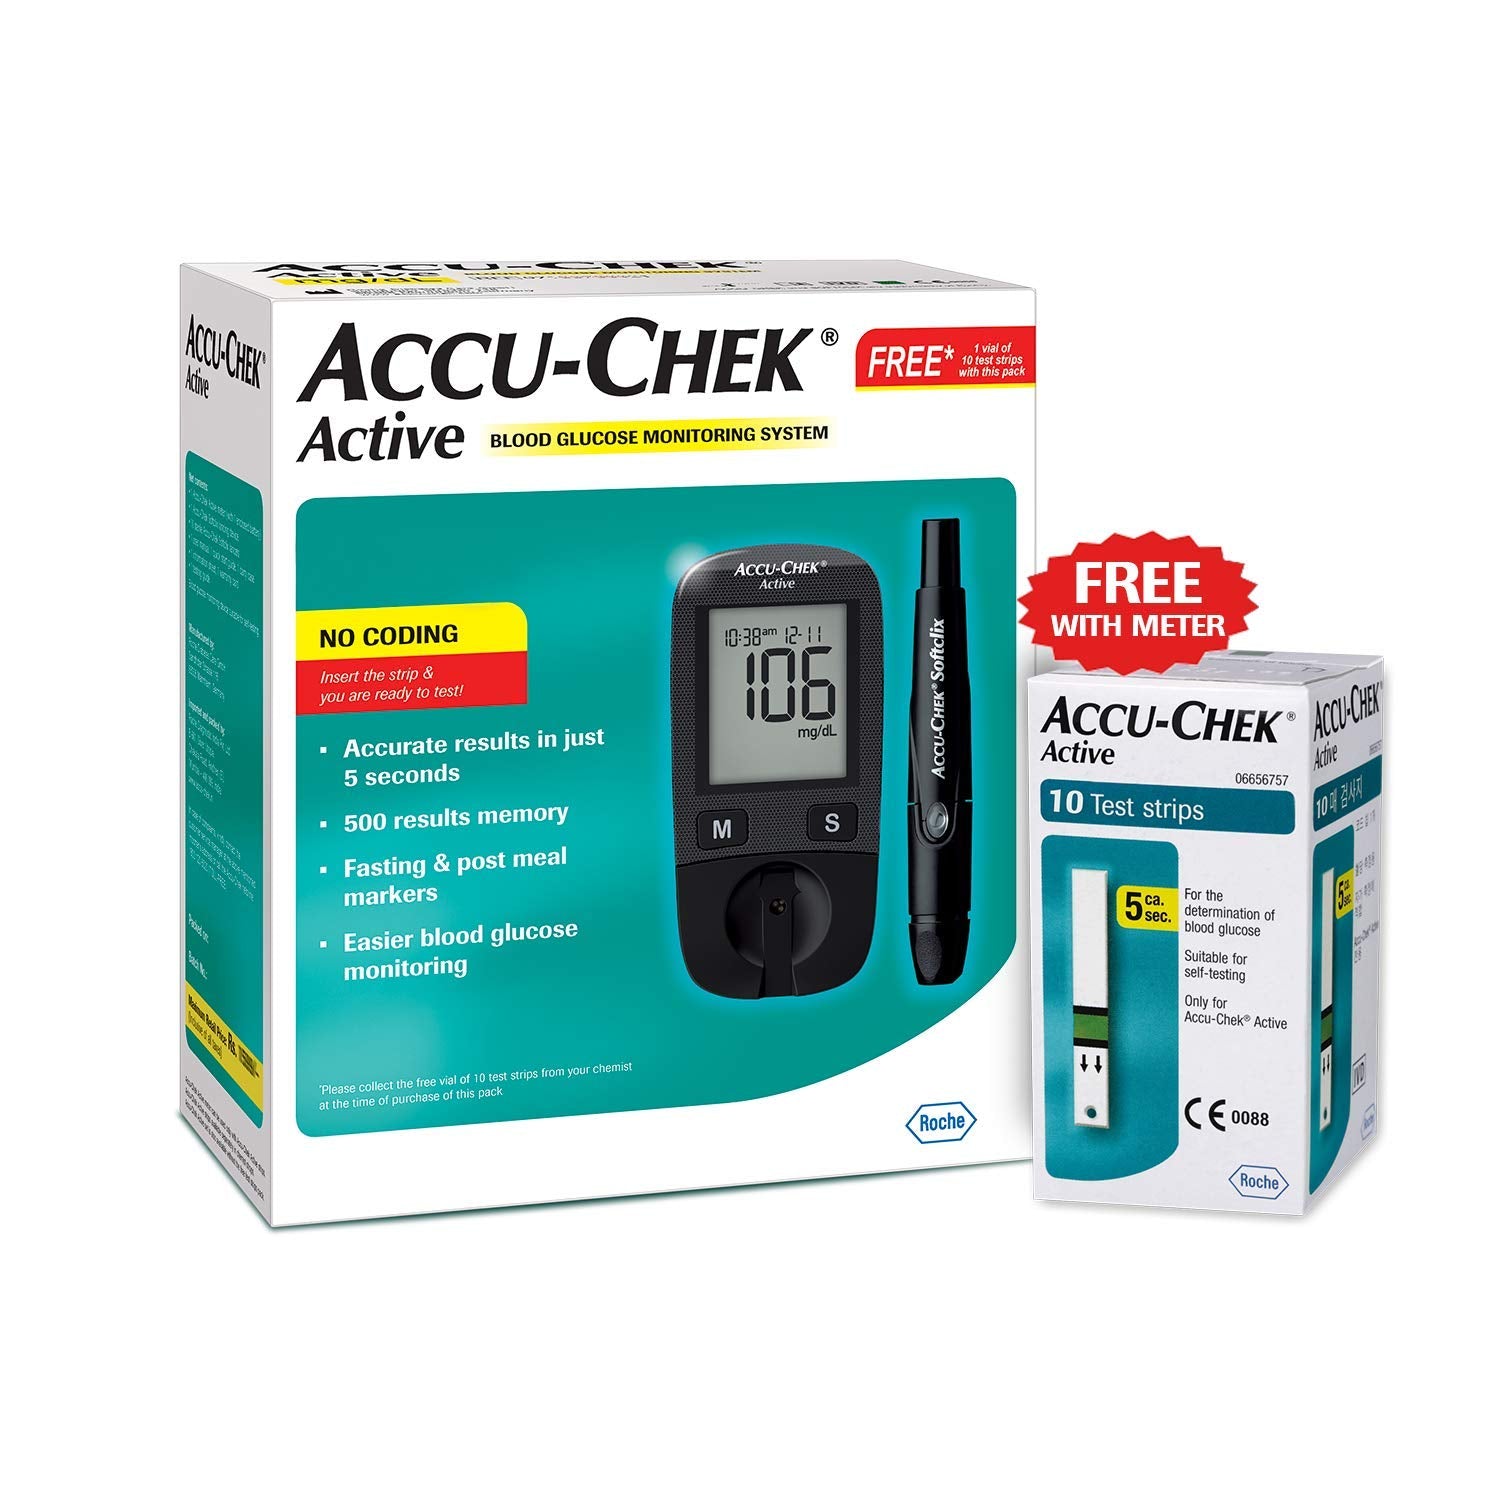 Accuchek active Glucometer kit with 10 strips free